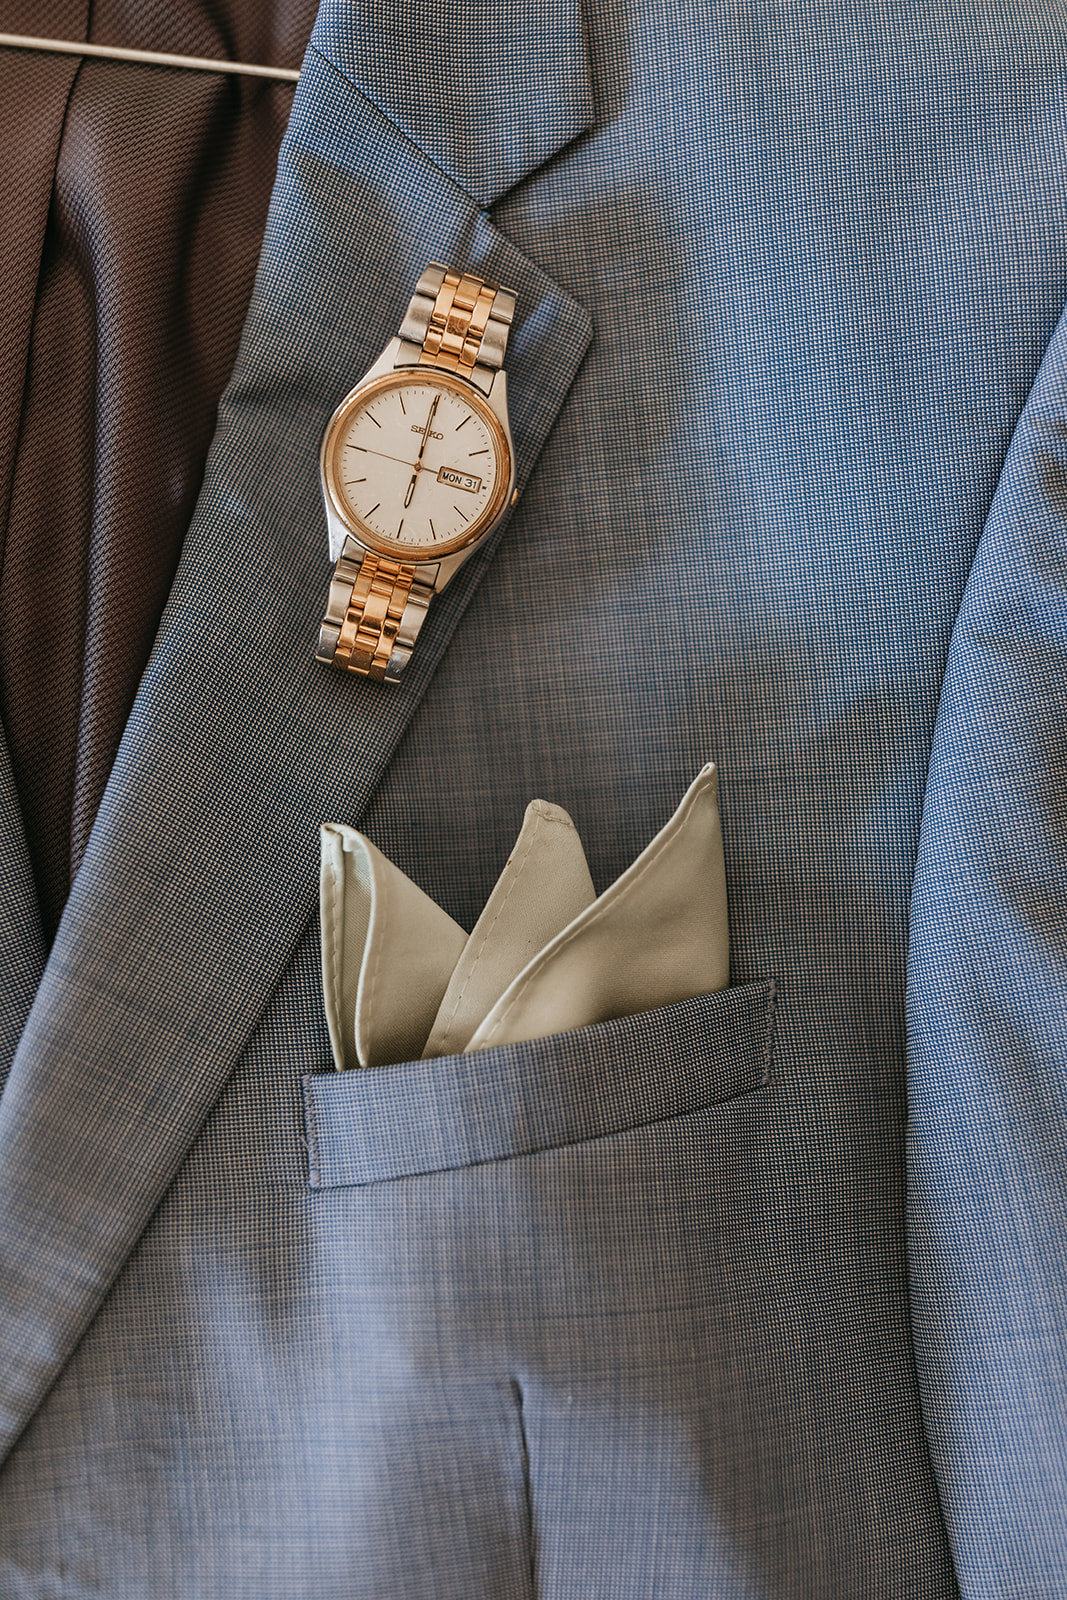 grooms suit with a watch | The Penny: A Downtown Wedding Venue in San Luis Obispo